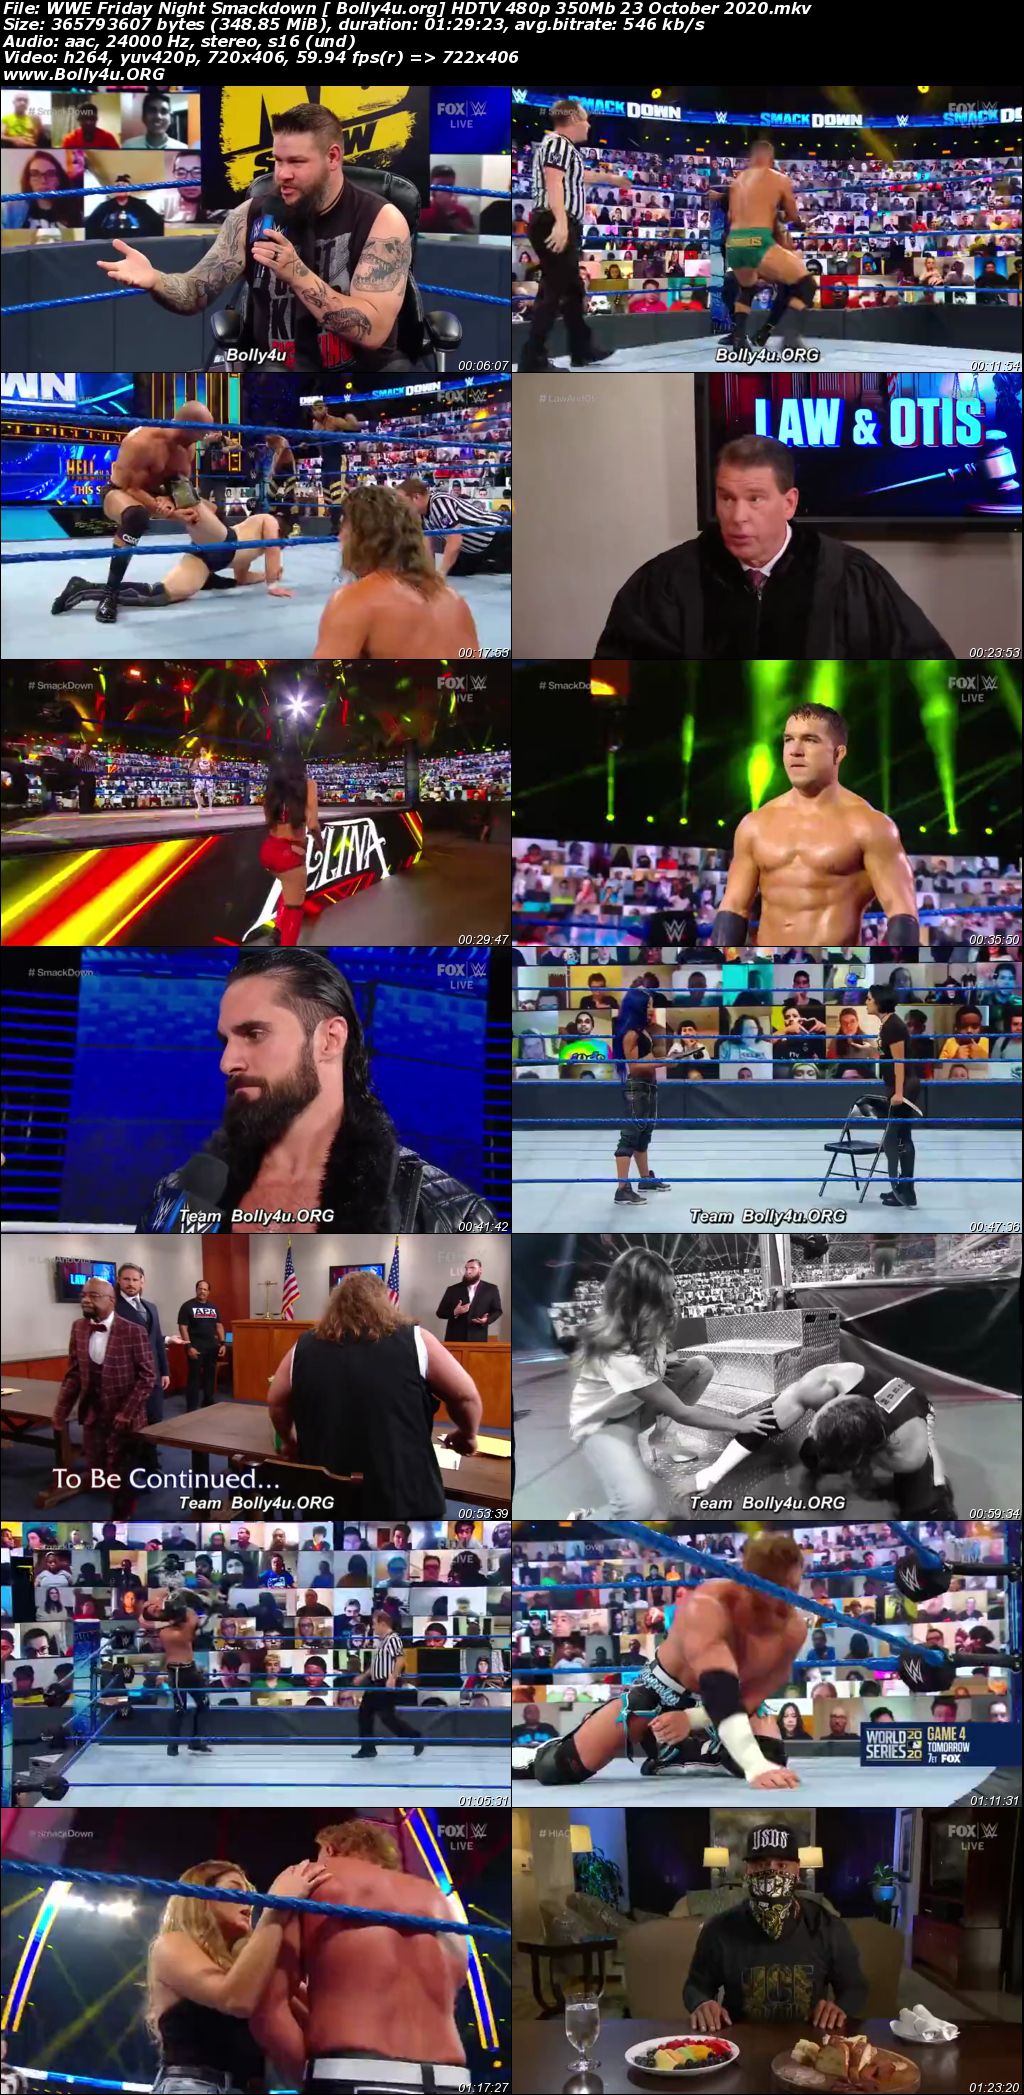 WWE Friday Night Smackdown HDTV 480p 350Mb 23 October 2020 Download